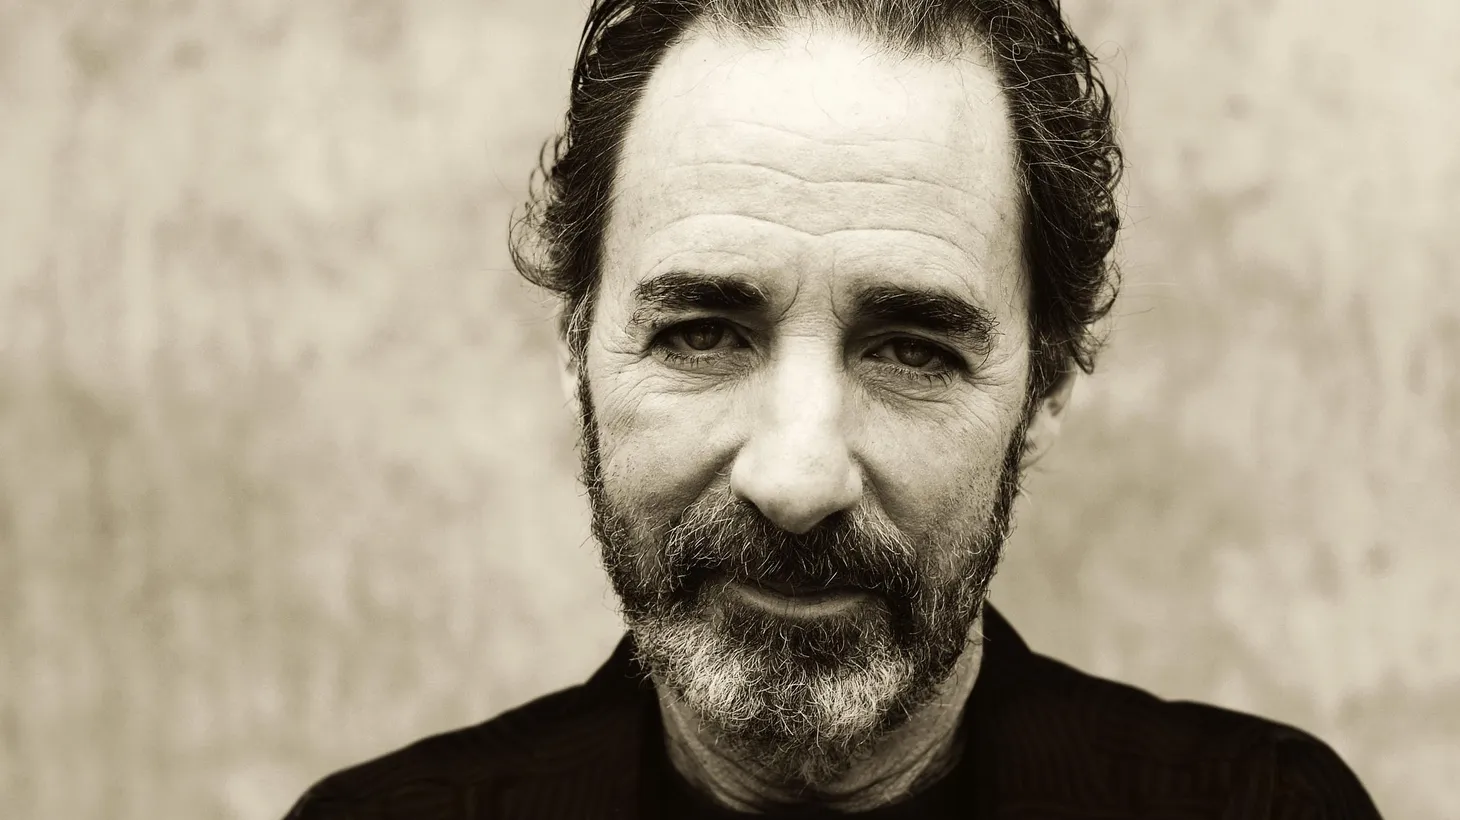 Harry Shearer explores the sounds of New Orleans with Tom McDermott and Evan Christopher.